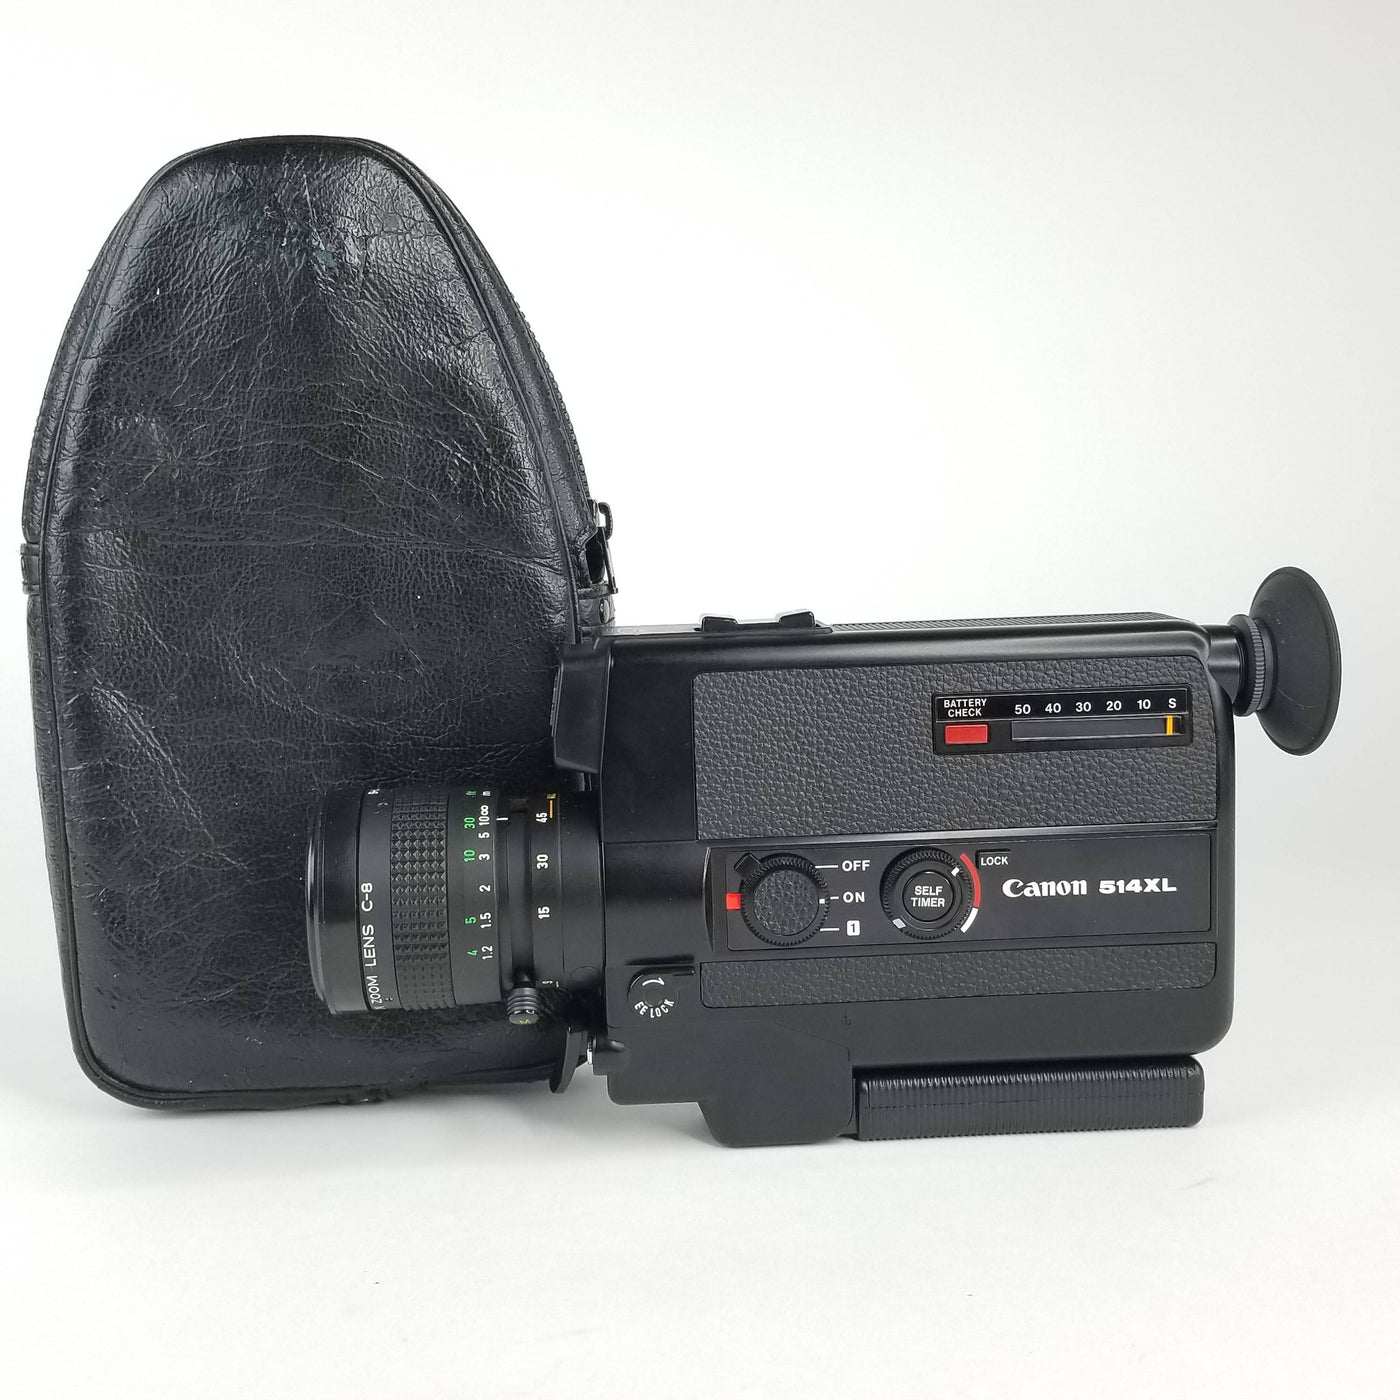 Canon 514XL Super 8 Camera Professionally Serviced and Fully Tested - OPTIONS (Bag, lens cap, VTG Film, 1 Year Service, Manual) Super 8 Cameras Canon 